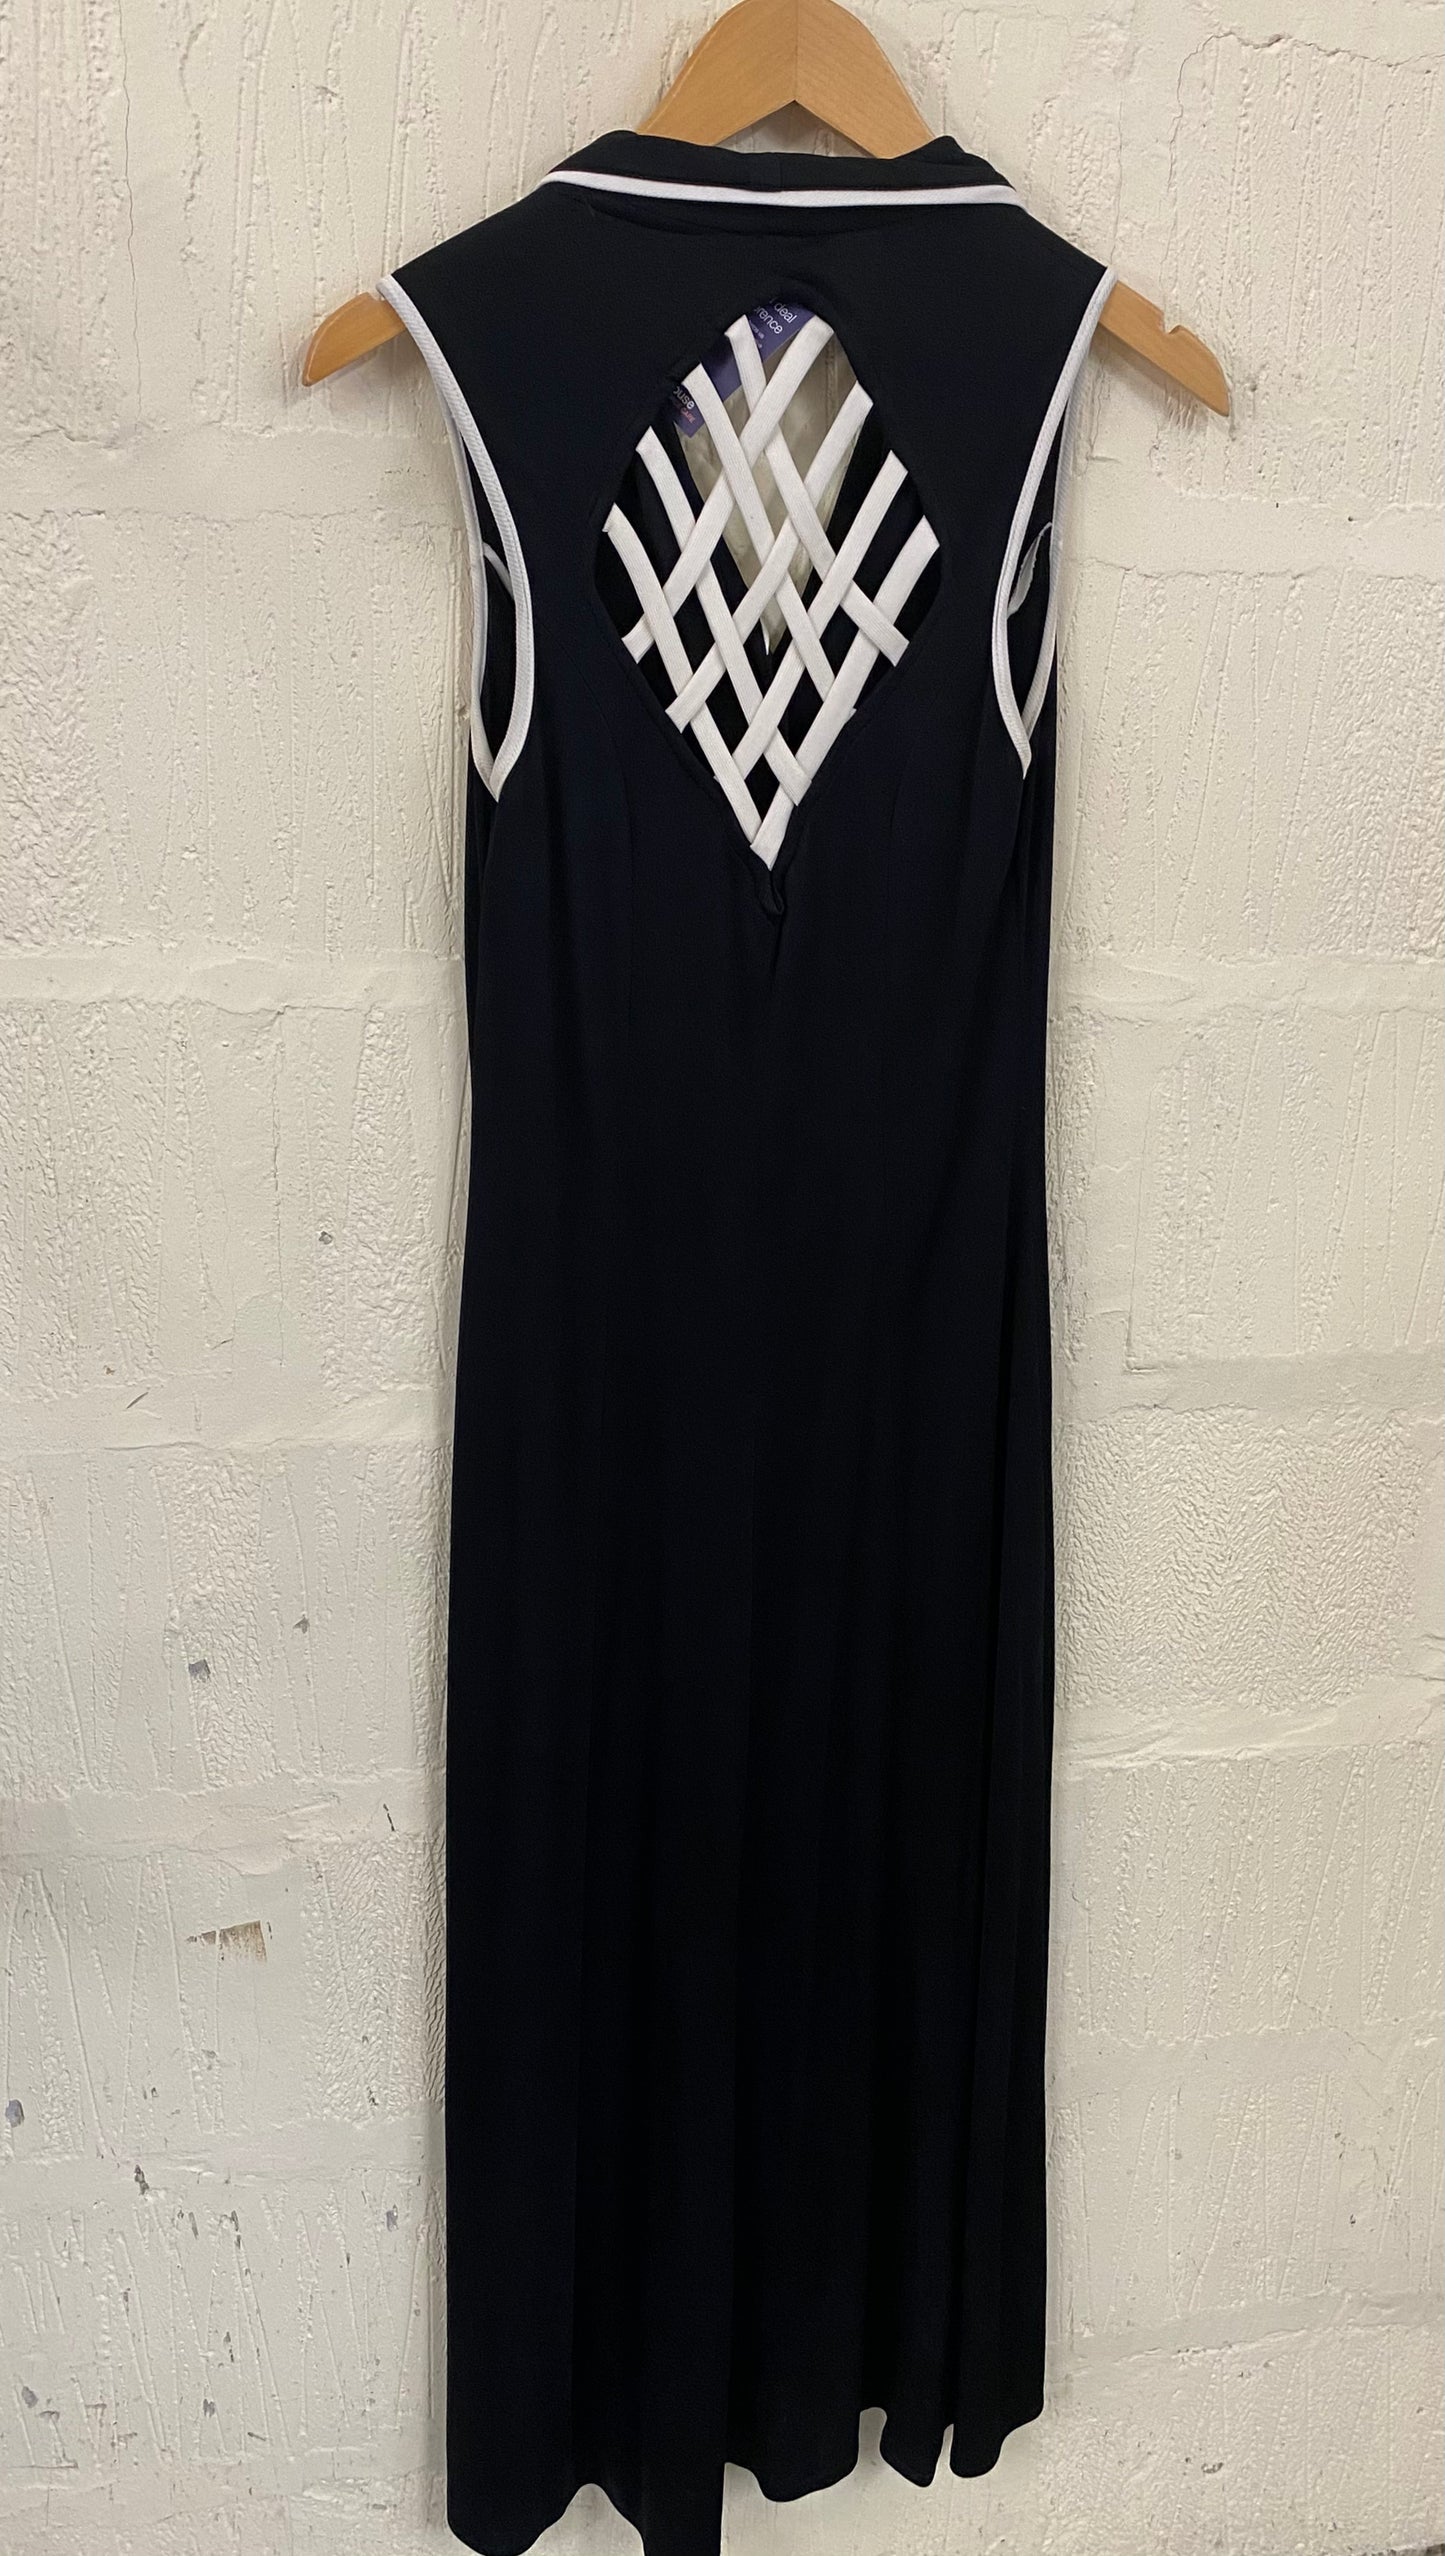 1960s style Black and White Maxi Dress